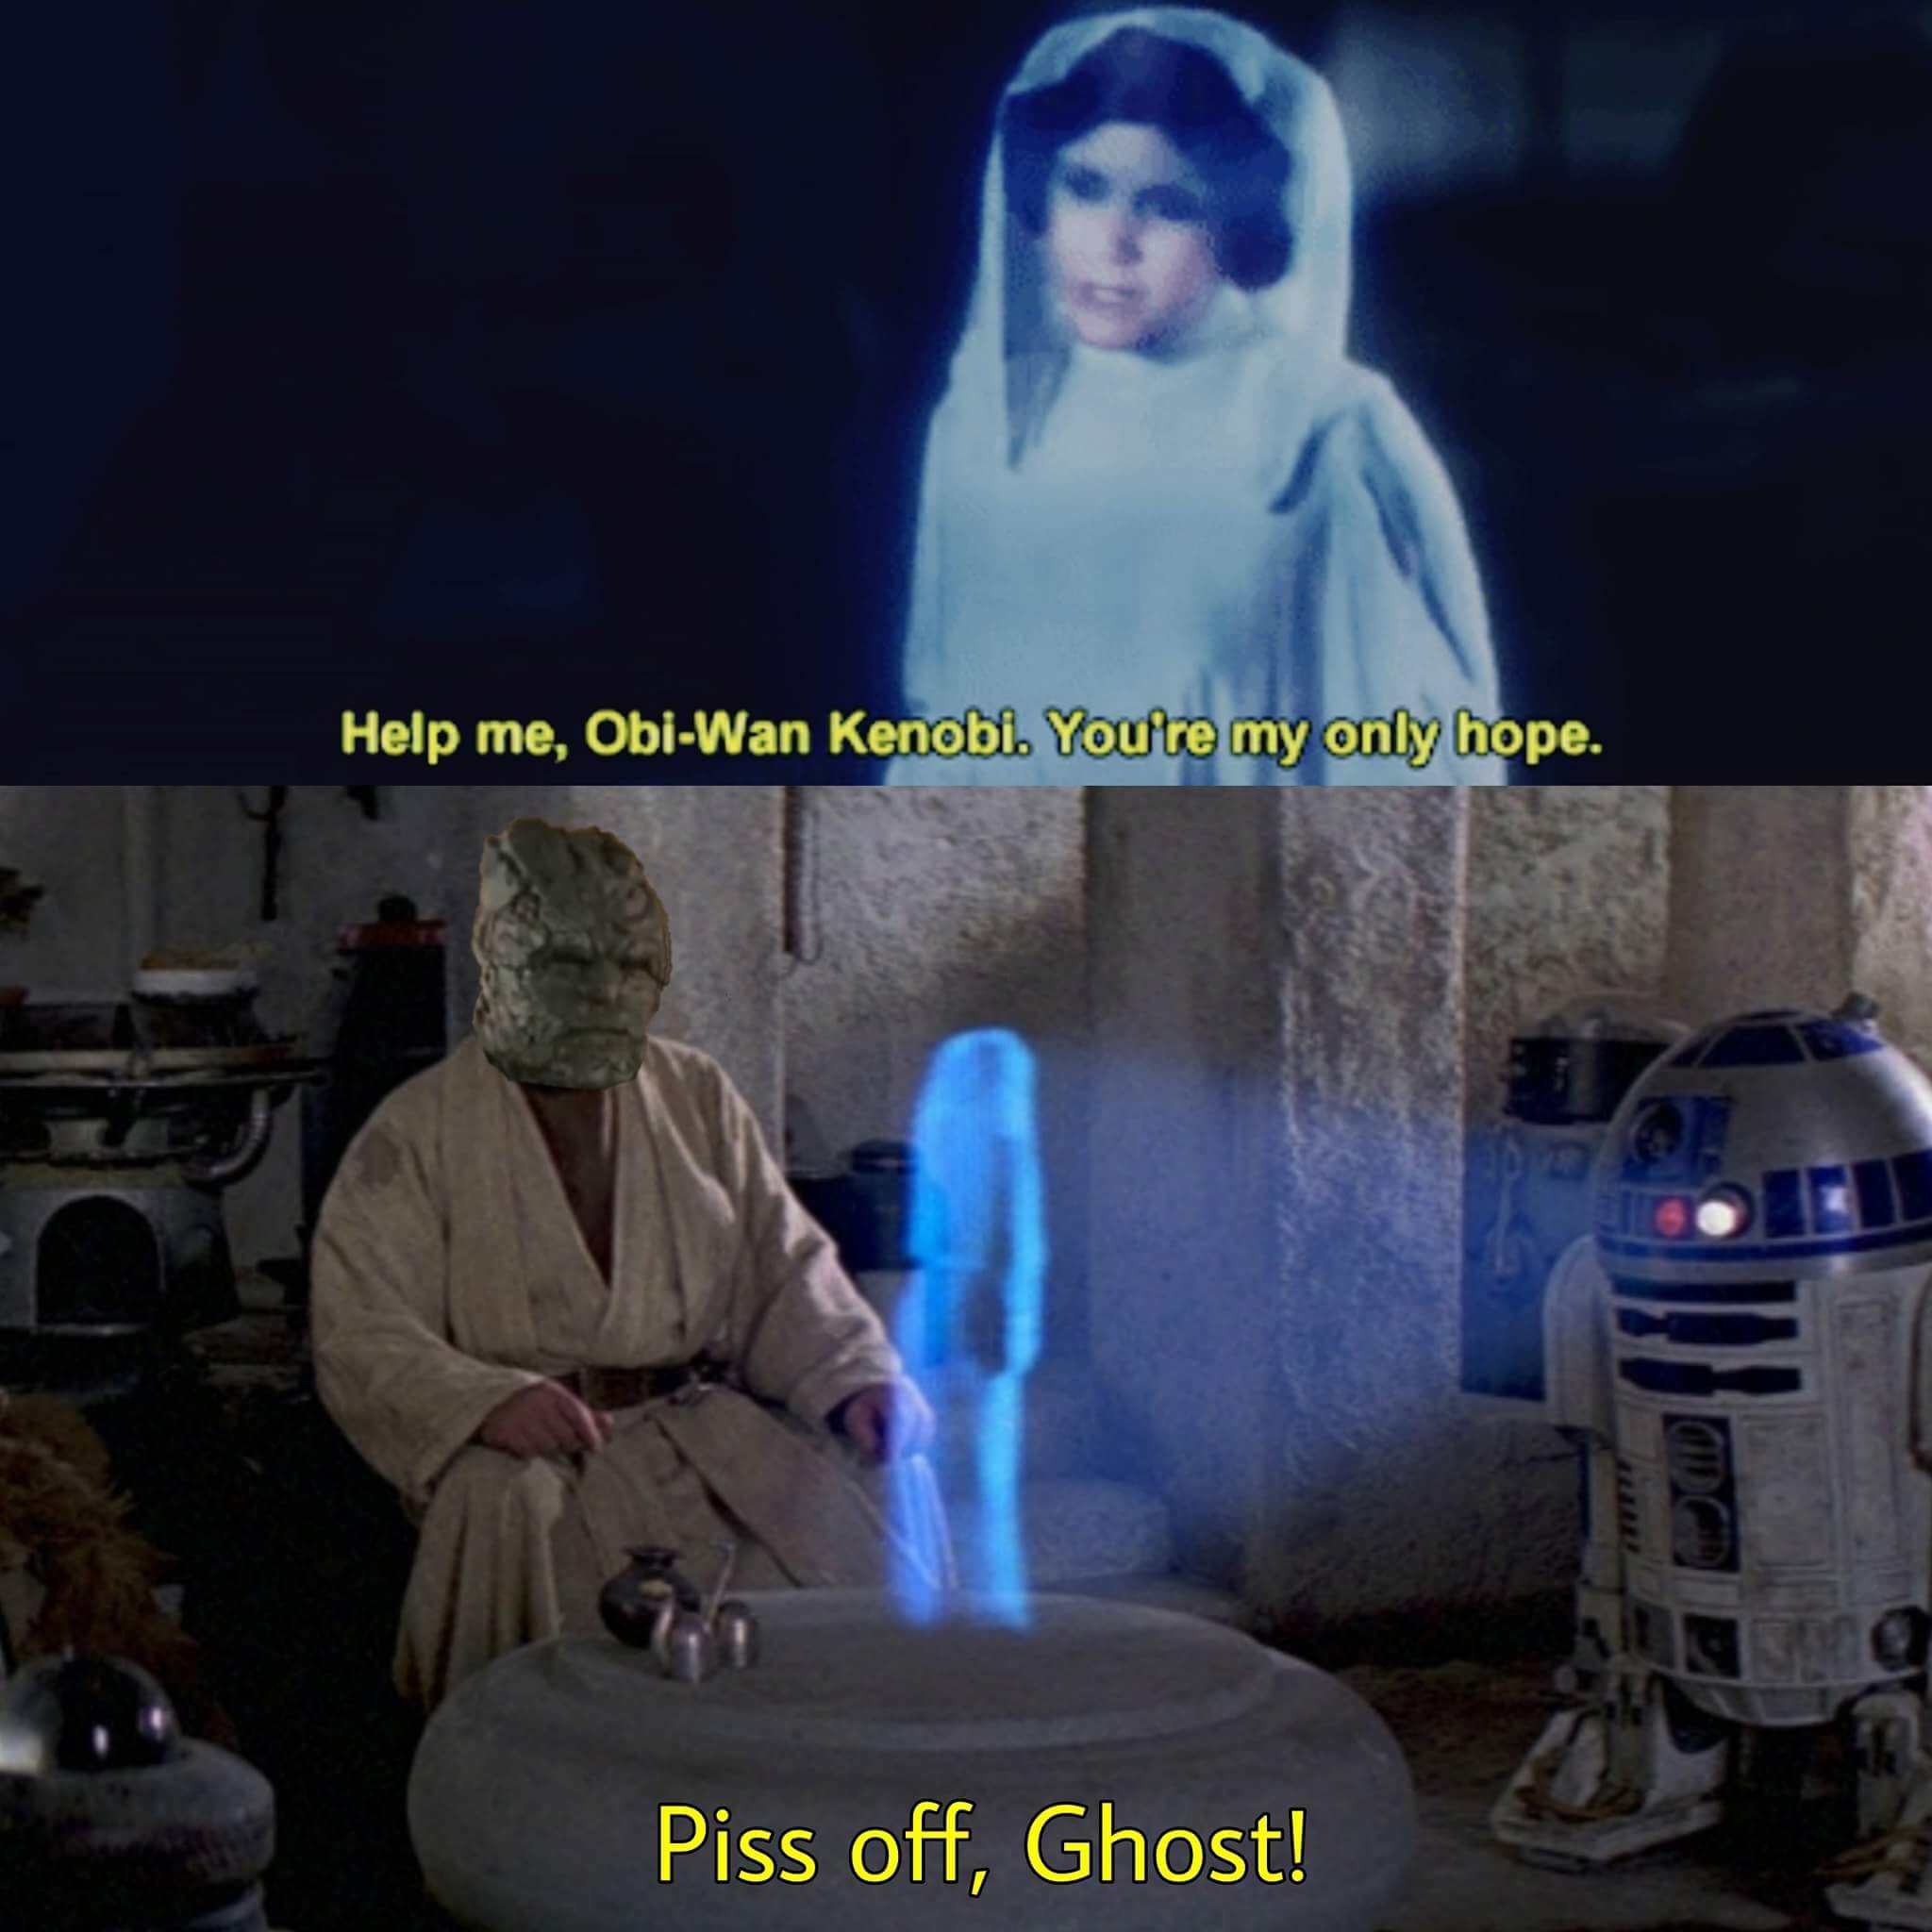 meme about piss of ghost meme - Help me, ObiWan Kenobi. You're my only hope. Piss off, Ghost!